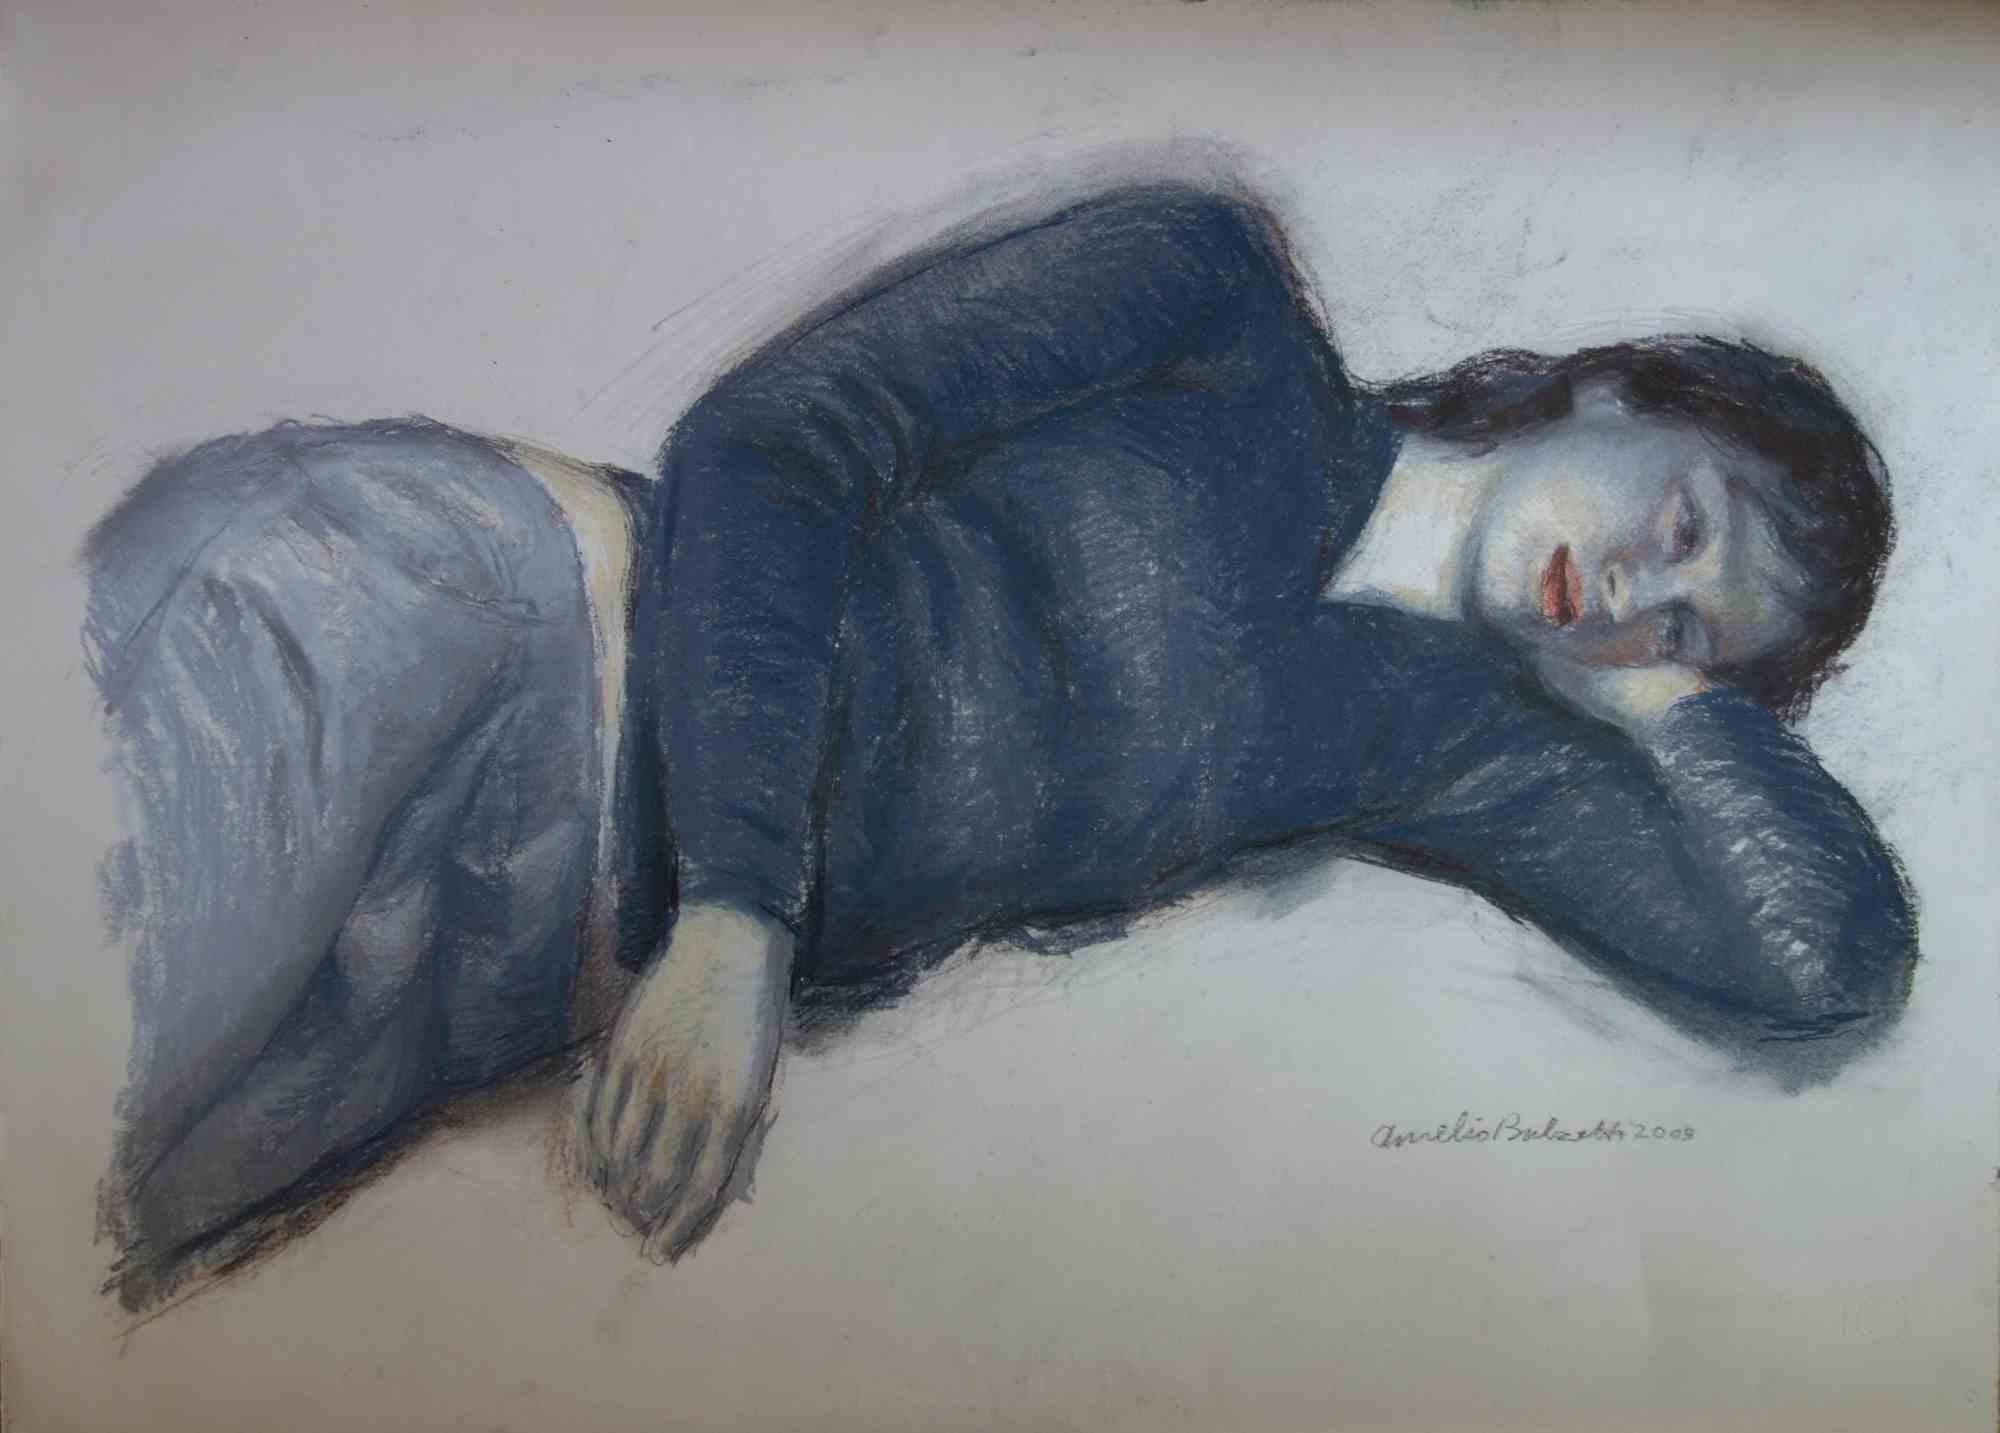 Donna Sdraiata is an original drawing realized by the Italian contemporary artist Aurelio Bulzatti in 2009.

The drawing is a unique piece pastel on paper. Hand-signed and dated by the artist.

Excellent conditions.

Donna Sdraiata, literally Woman